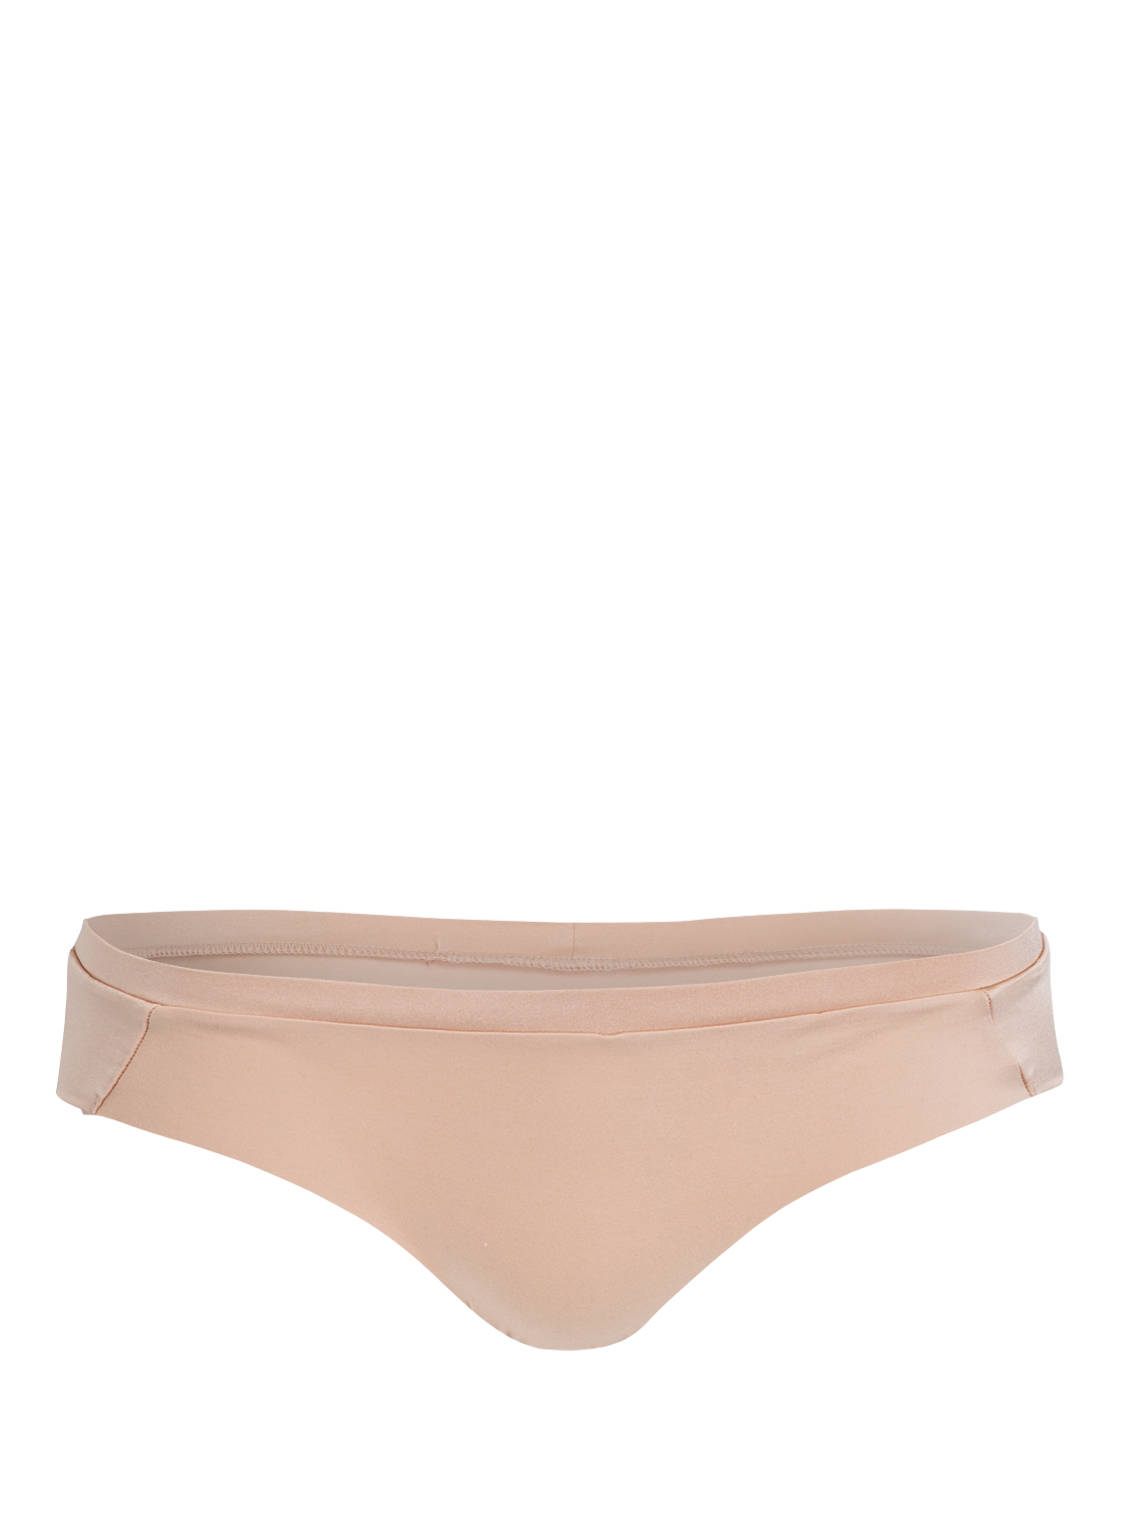 Triumph Panty Body Make-Up Soft Touch beige